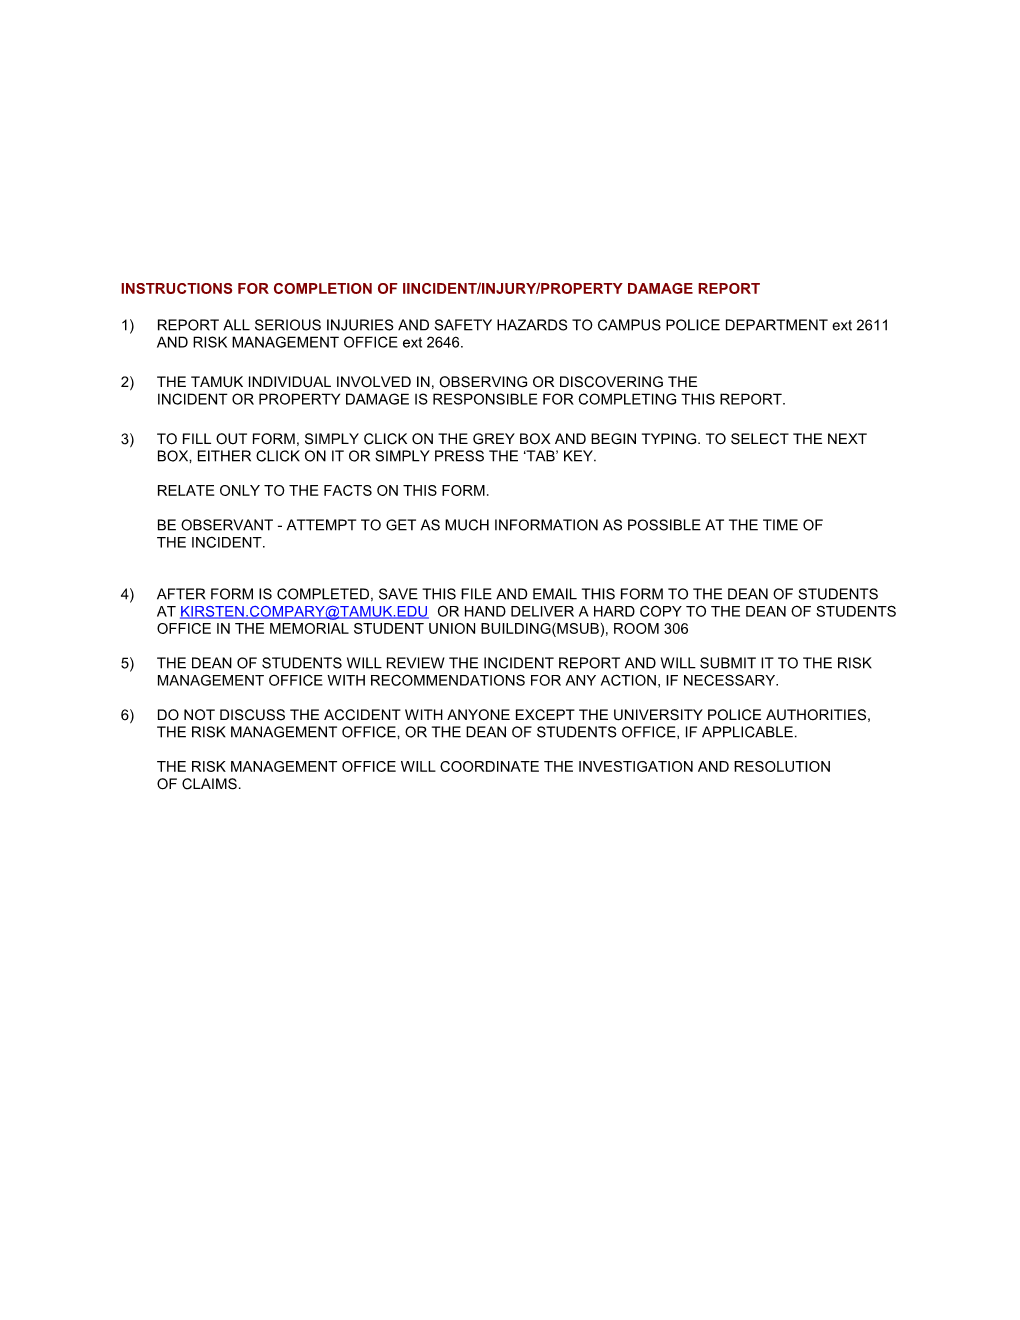 Instructions for Completion of Iincident/Injury/Property Damage Report